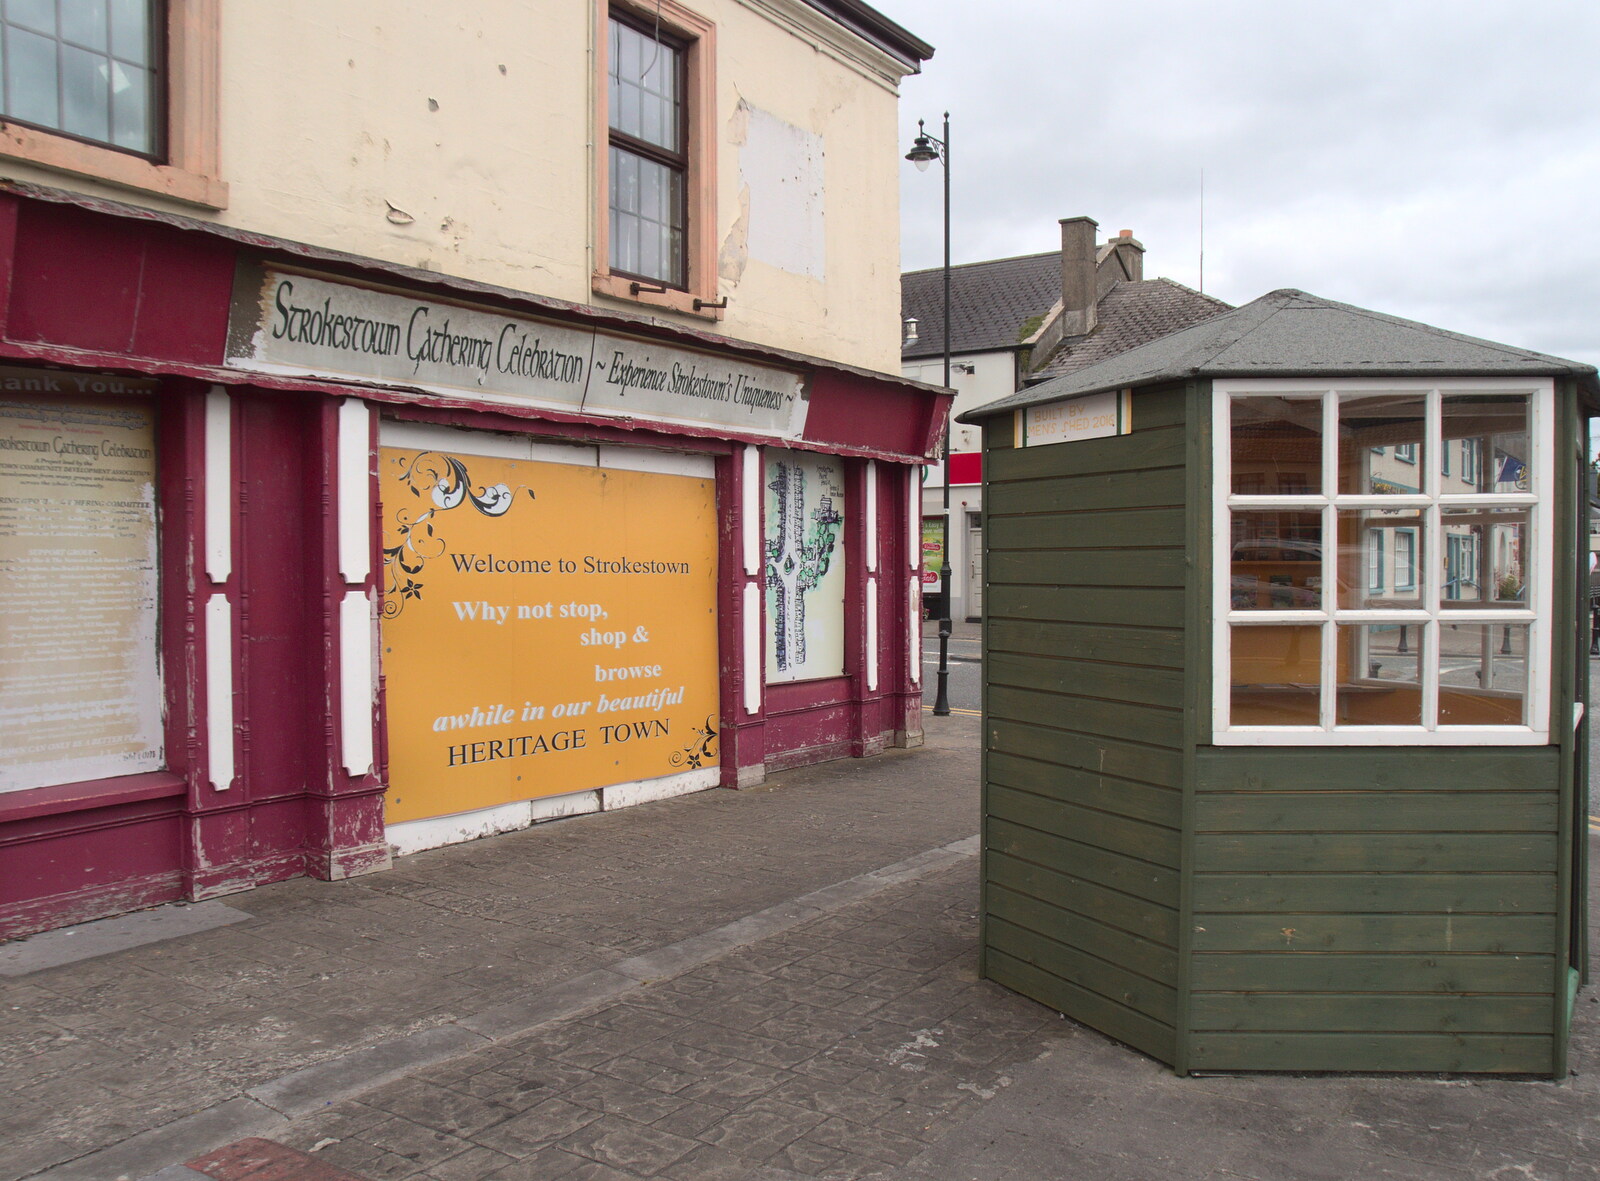 A shed on the pavement, Church Street from From Achill to Strokestown, Mayo and Roscommon, Ireland - 10th August 2017